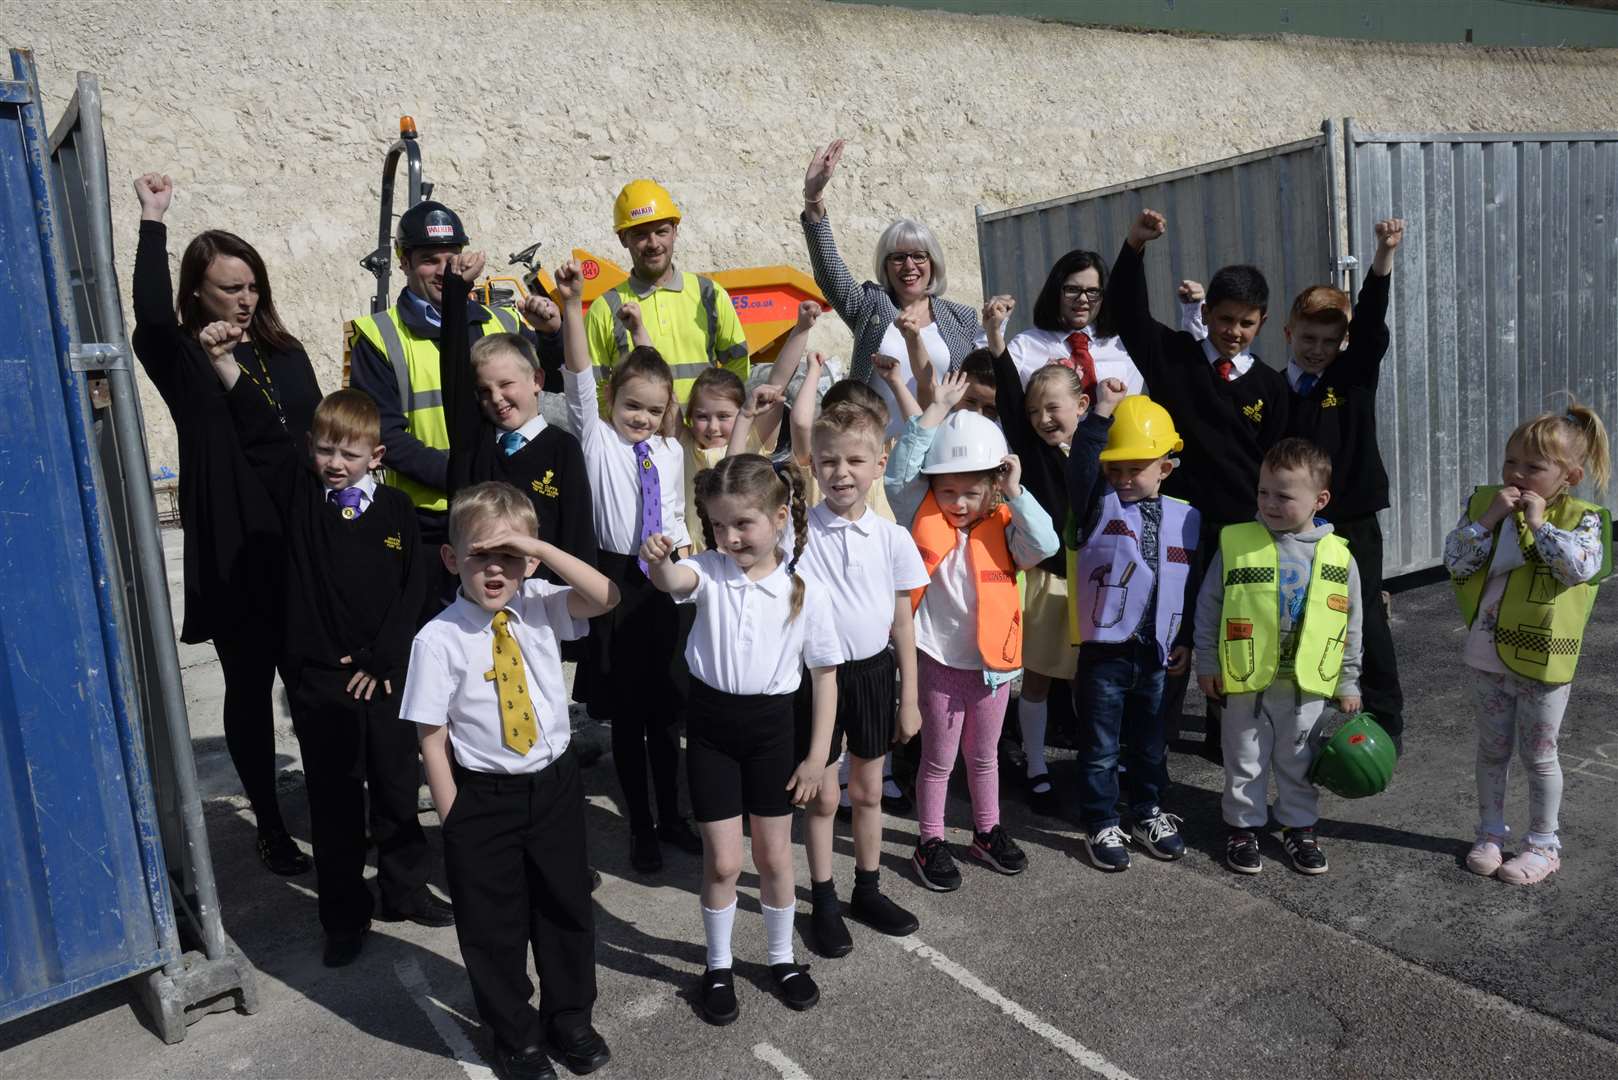 Pupils, staff and contractors on a tour of inspection of work on the extensions to White Cliffs Primary School